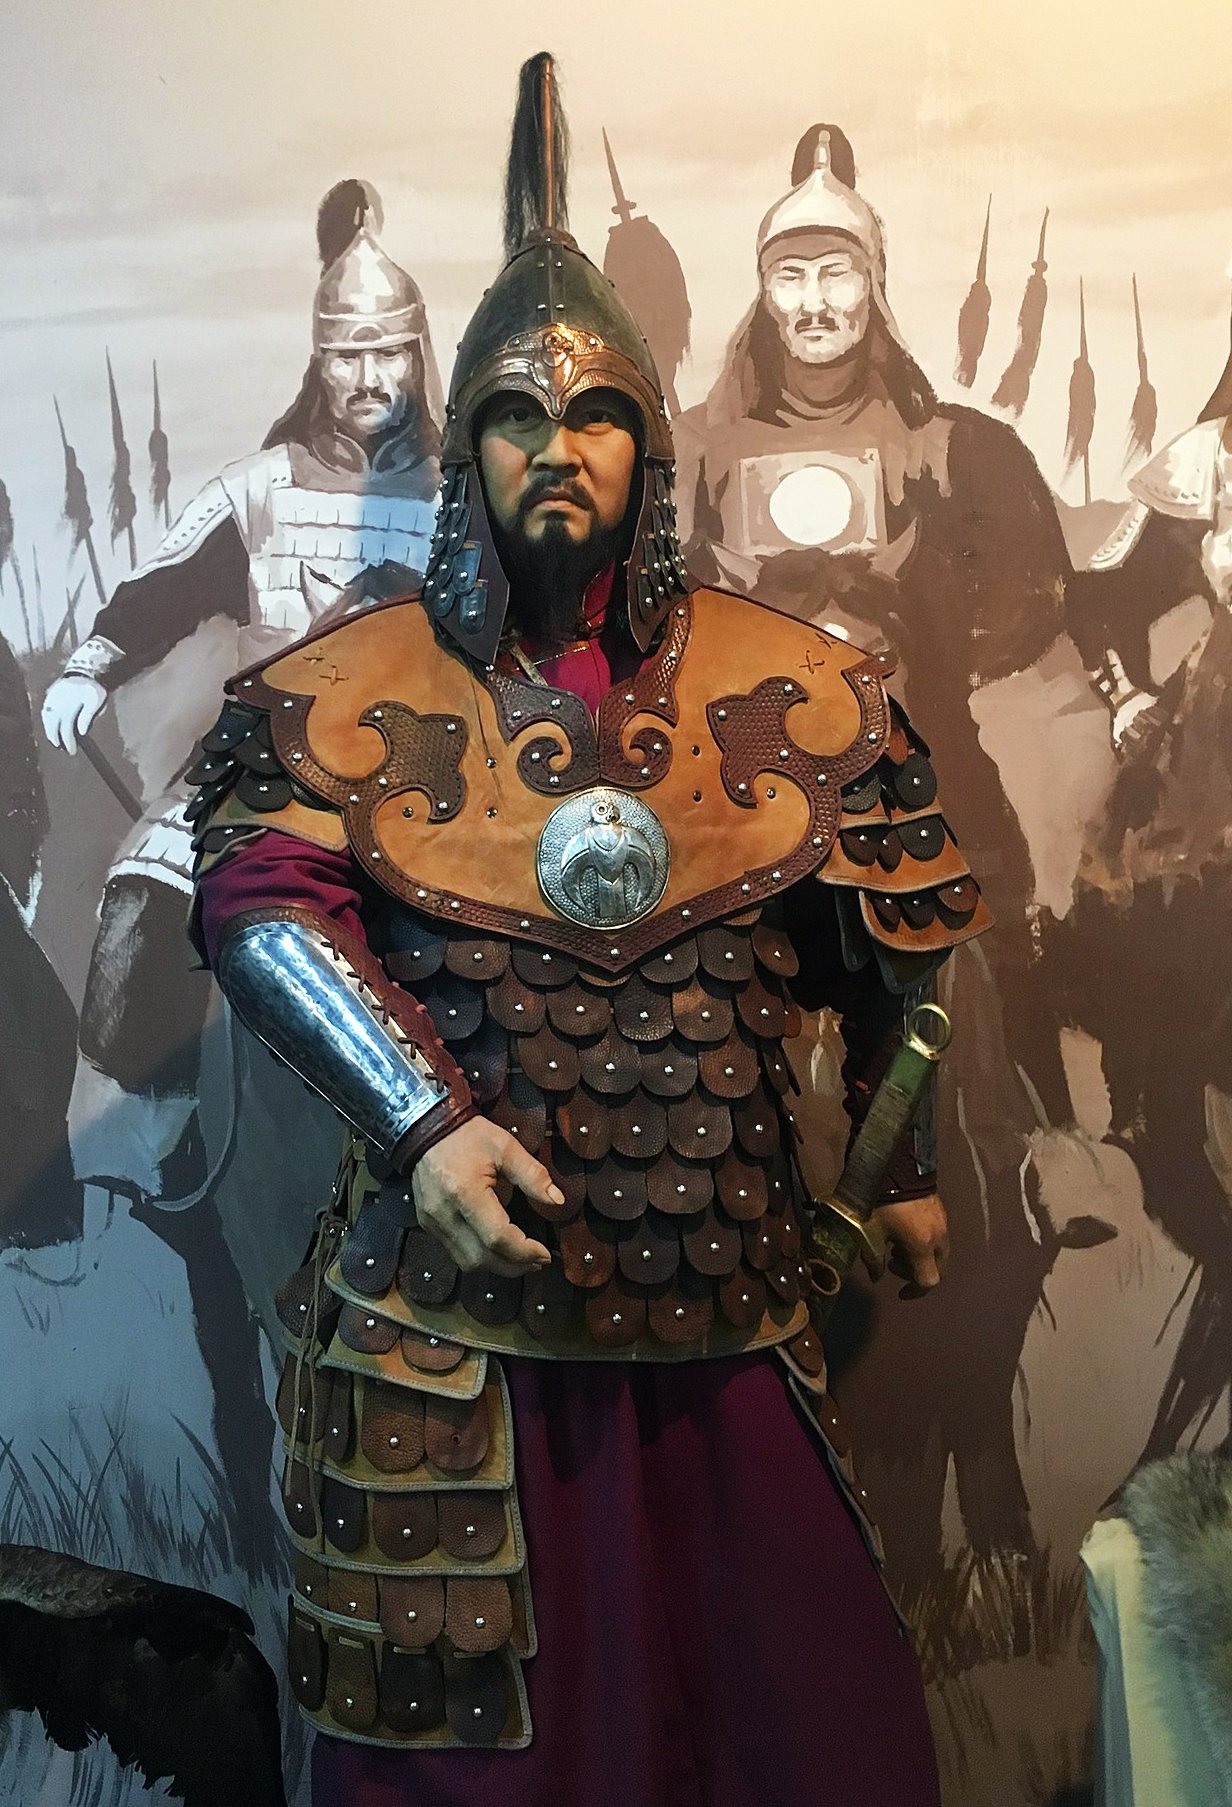 A photo of the figure of Subutai wearing mongolian armor in front of a mural of a battle scene. The armor is metal and leather, with a helmet that has a plume and a breastplate with an emblem.